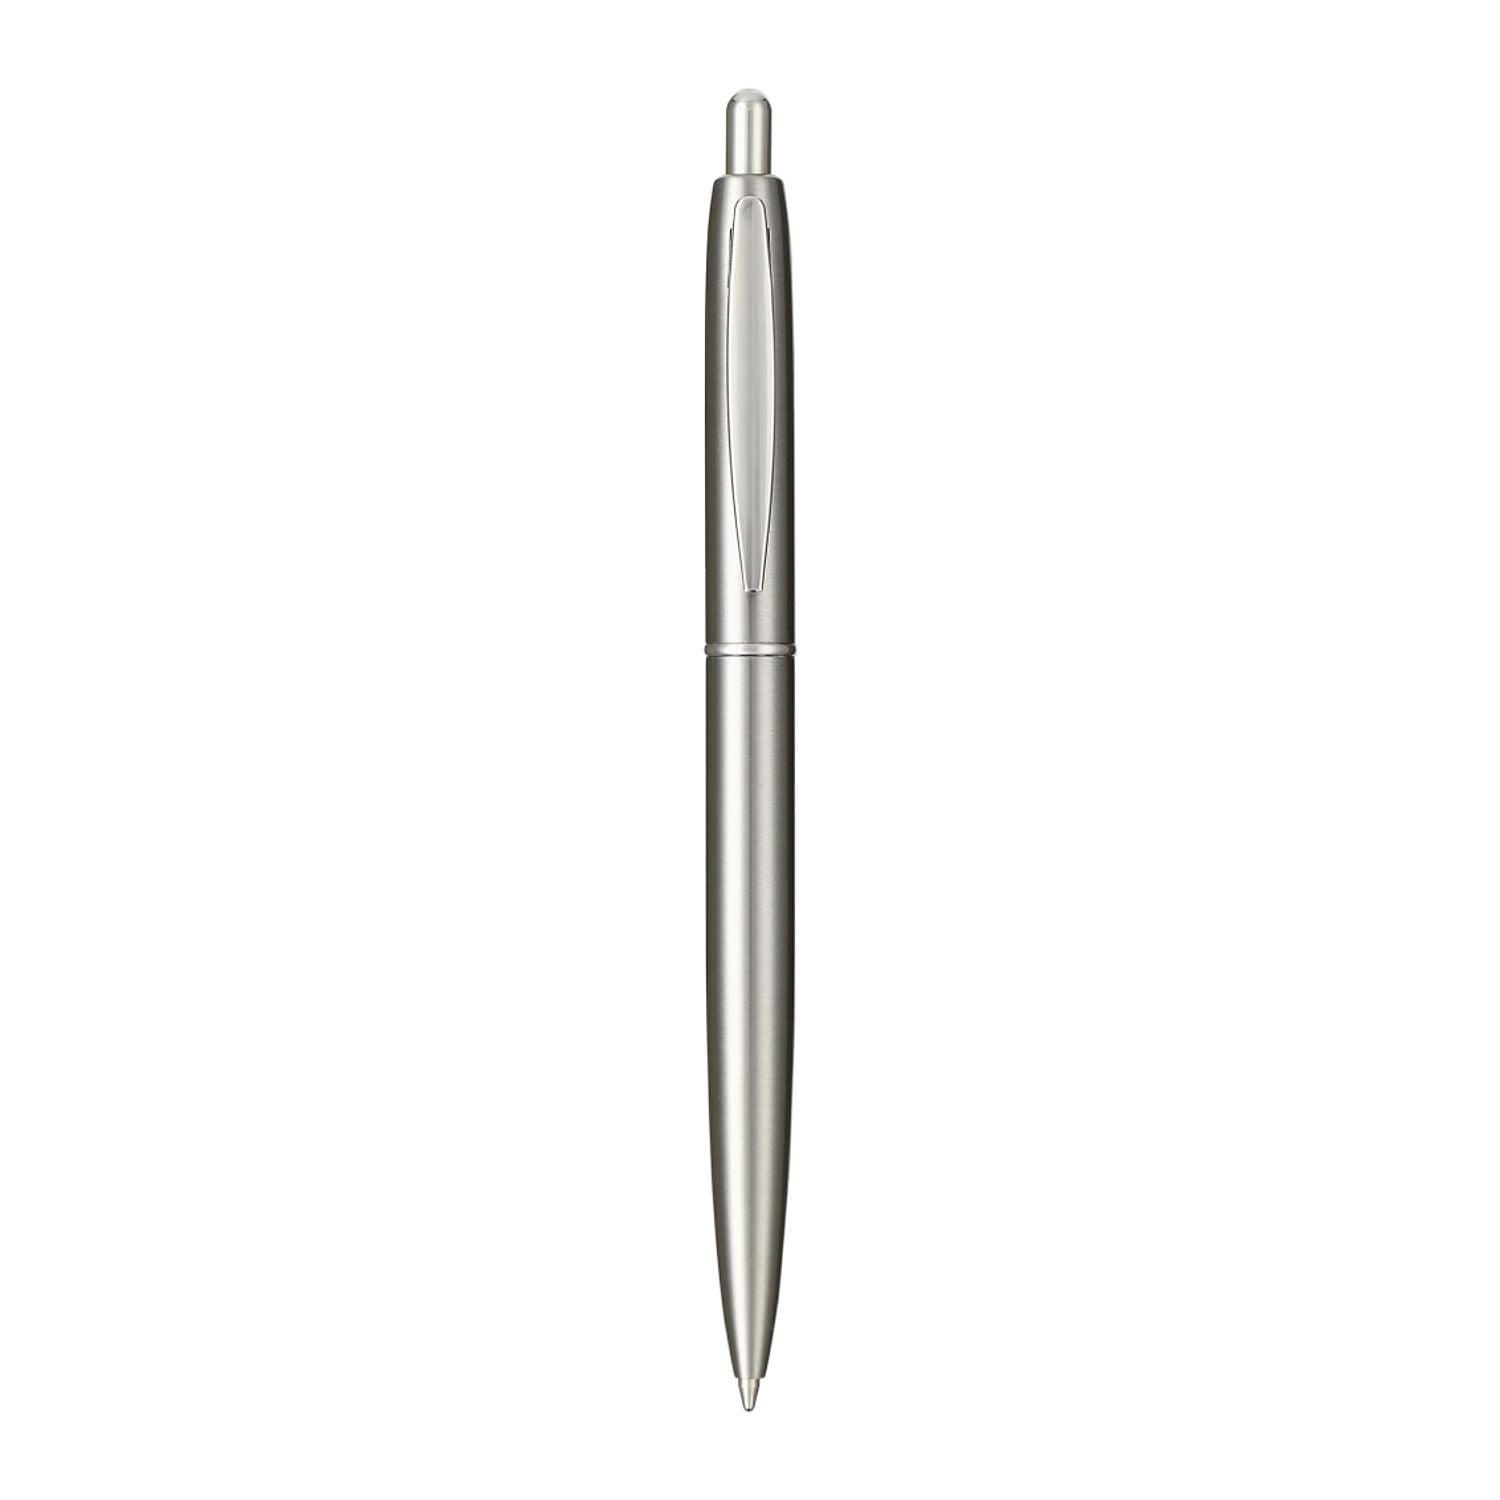 Customized recycled stainless steel ballpoint pen in silver.